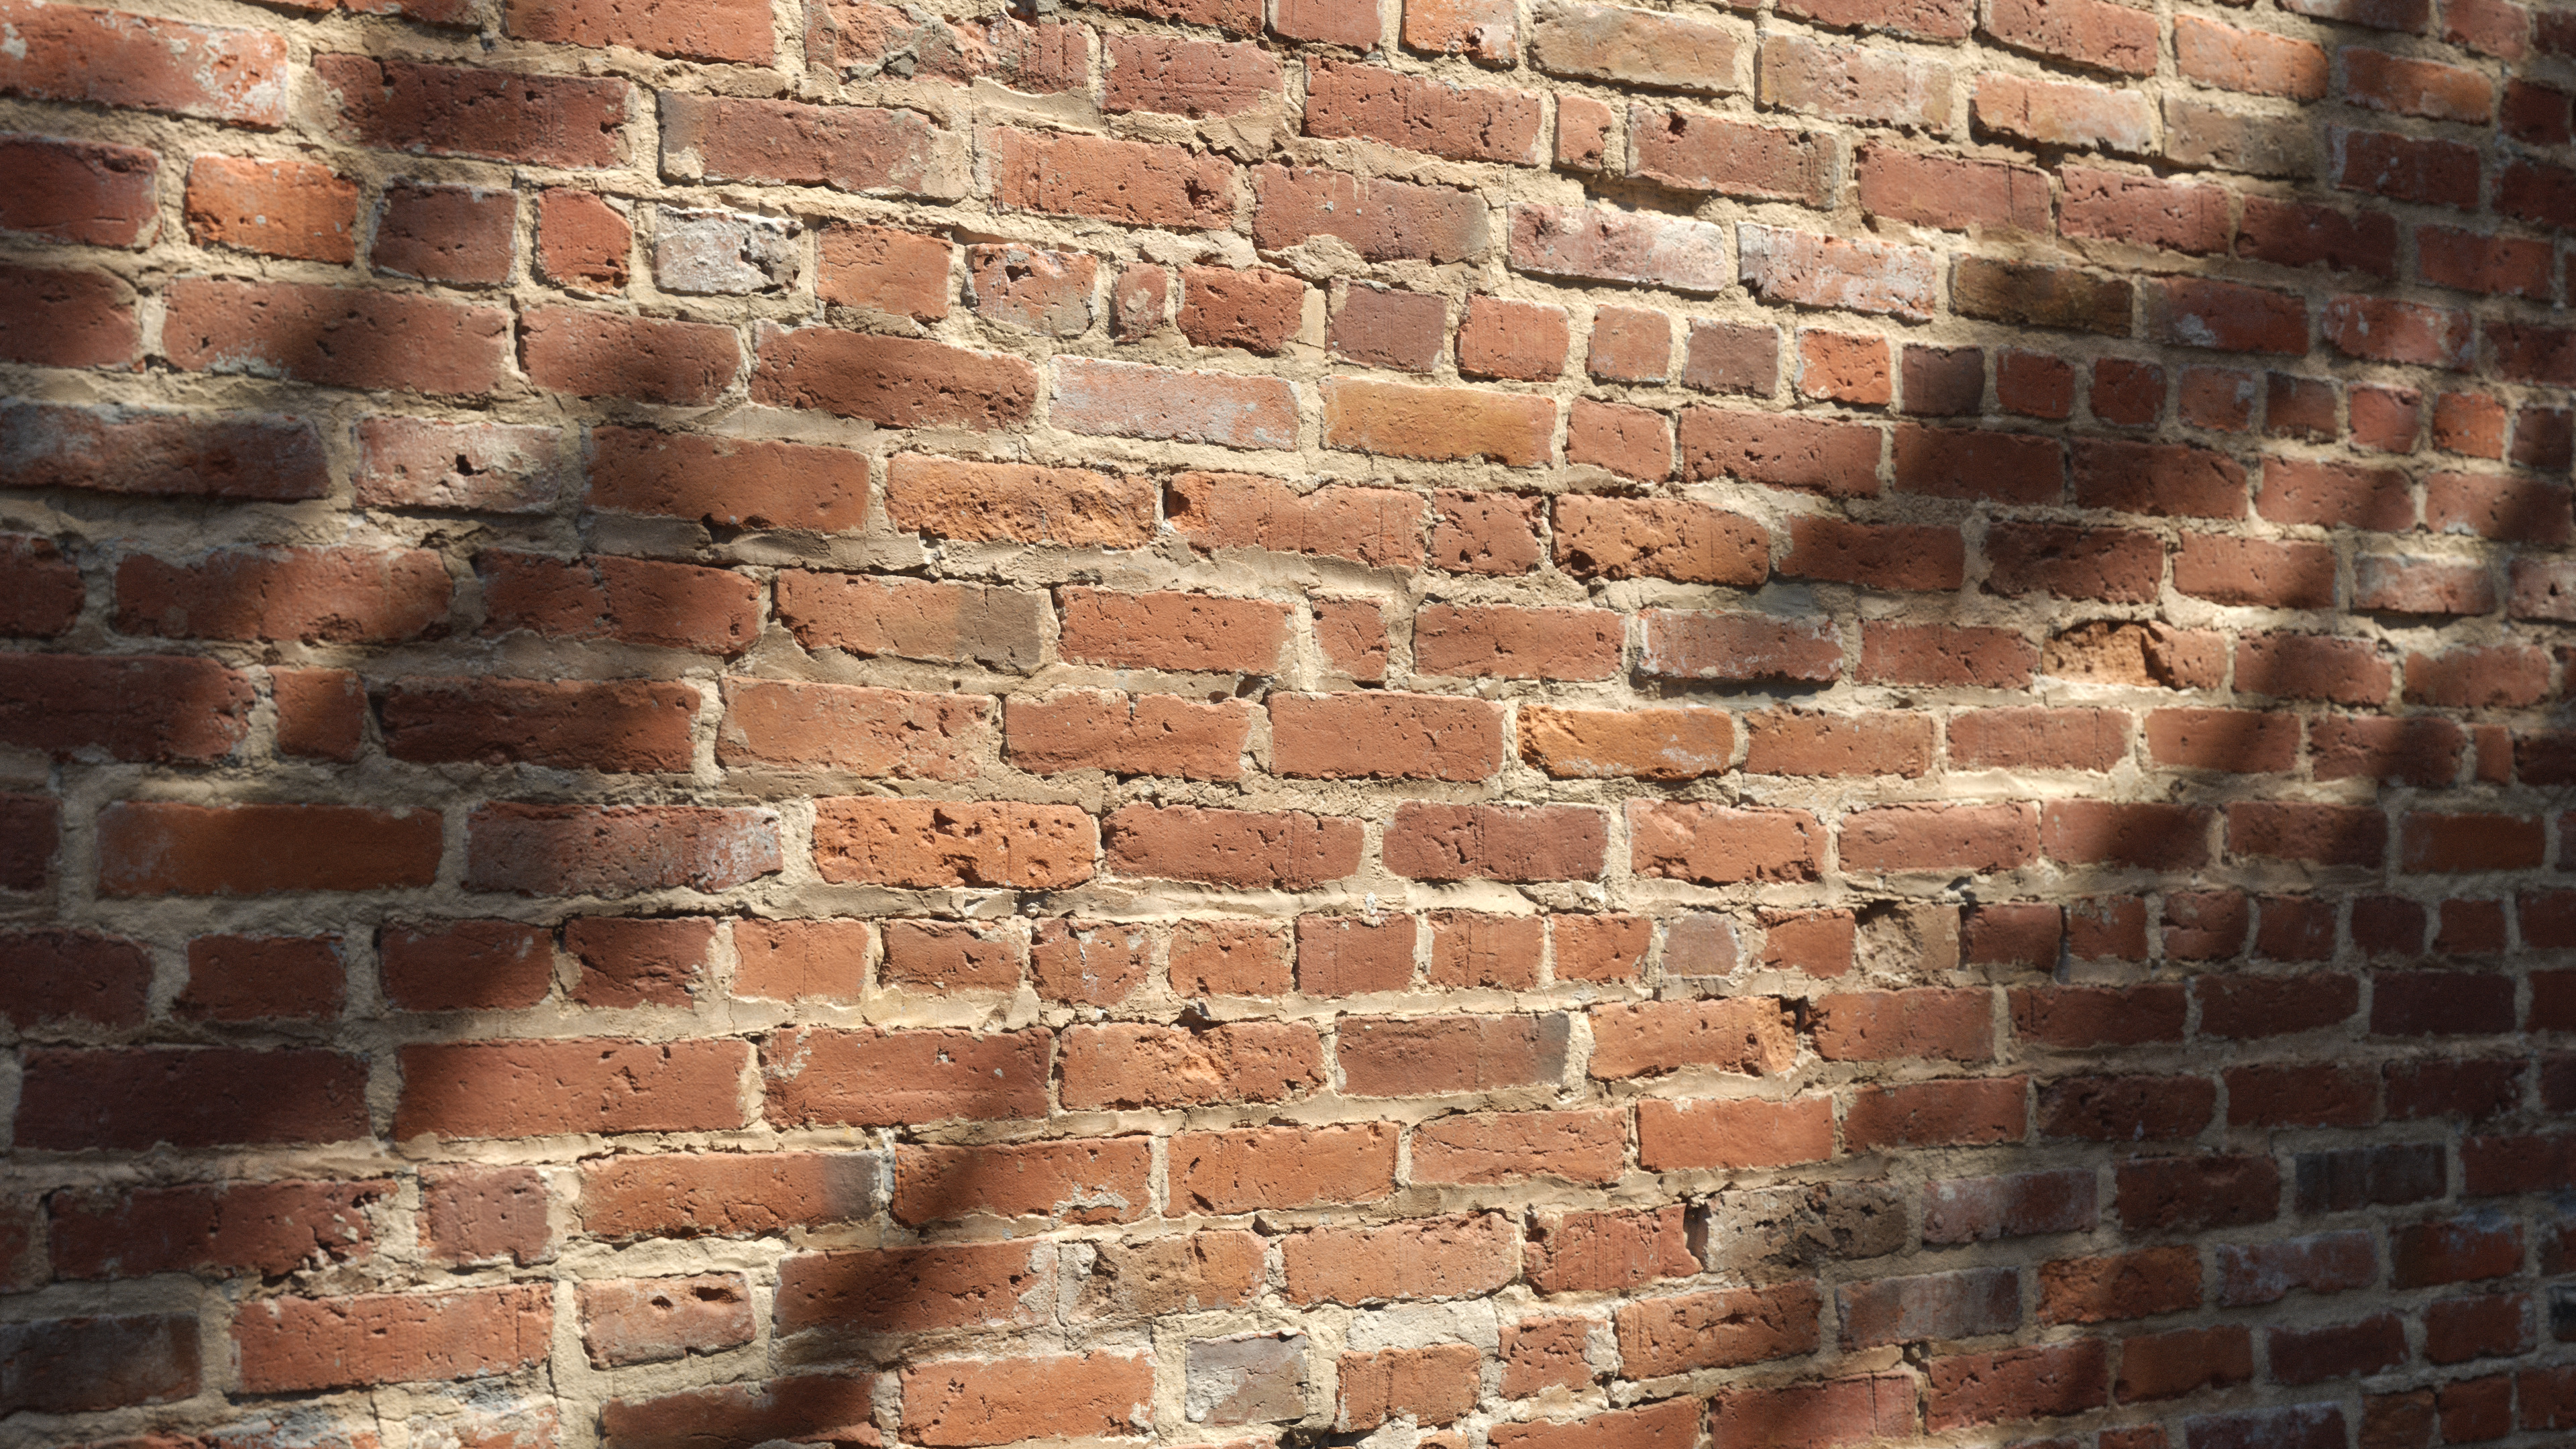 3D Scanned Brick Wall - 2x2 meters on Wall D Cor 3 id=62622